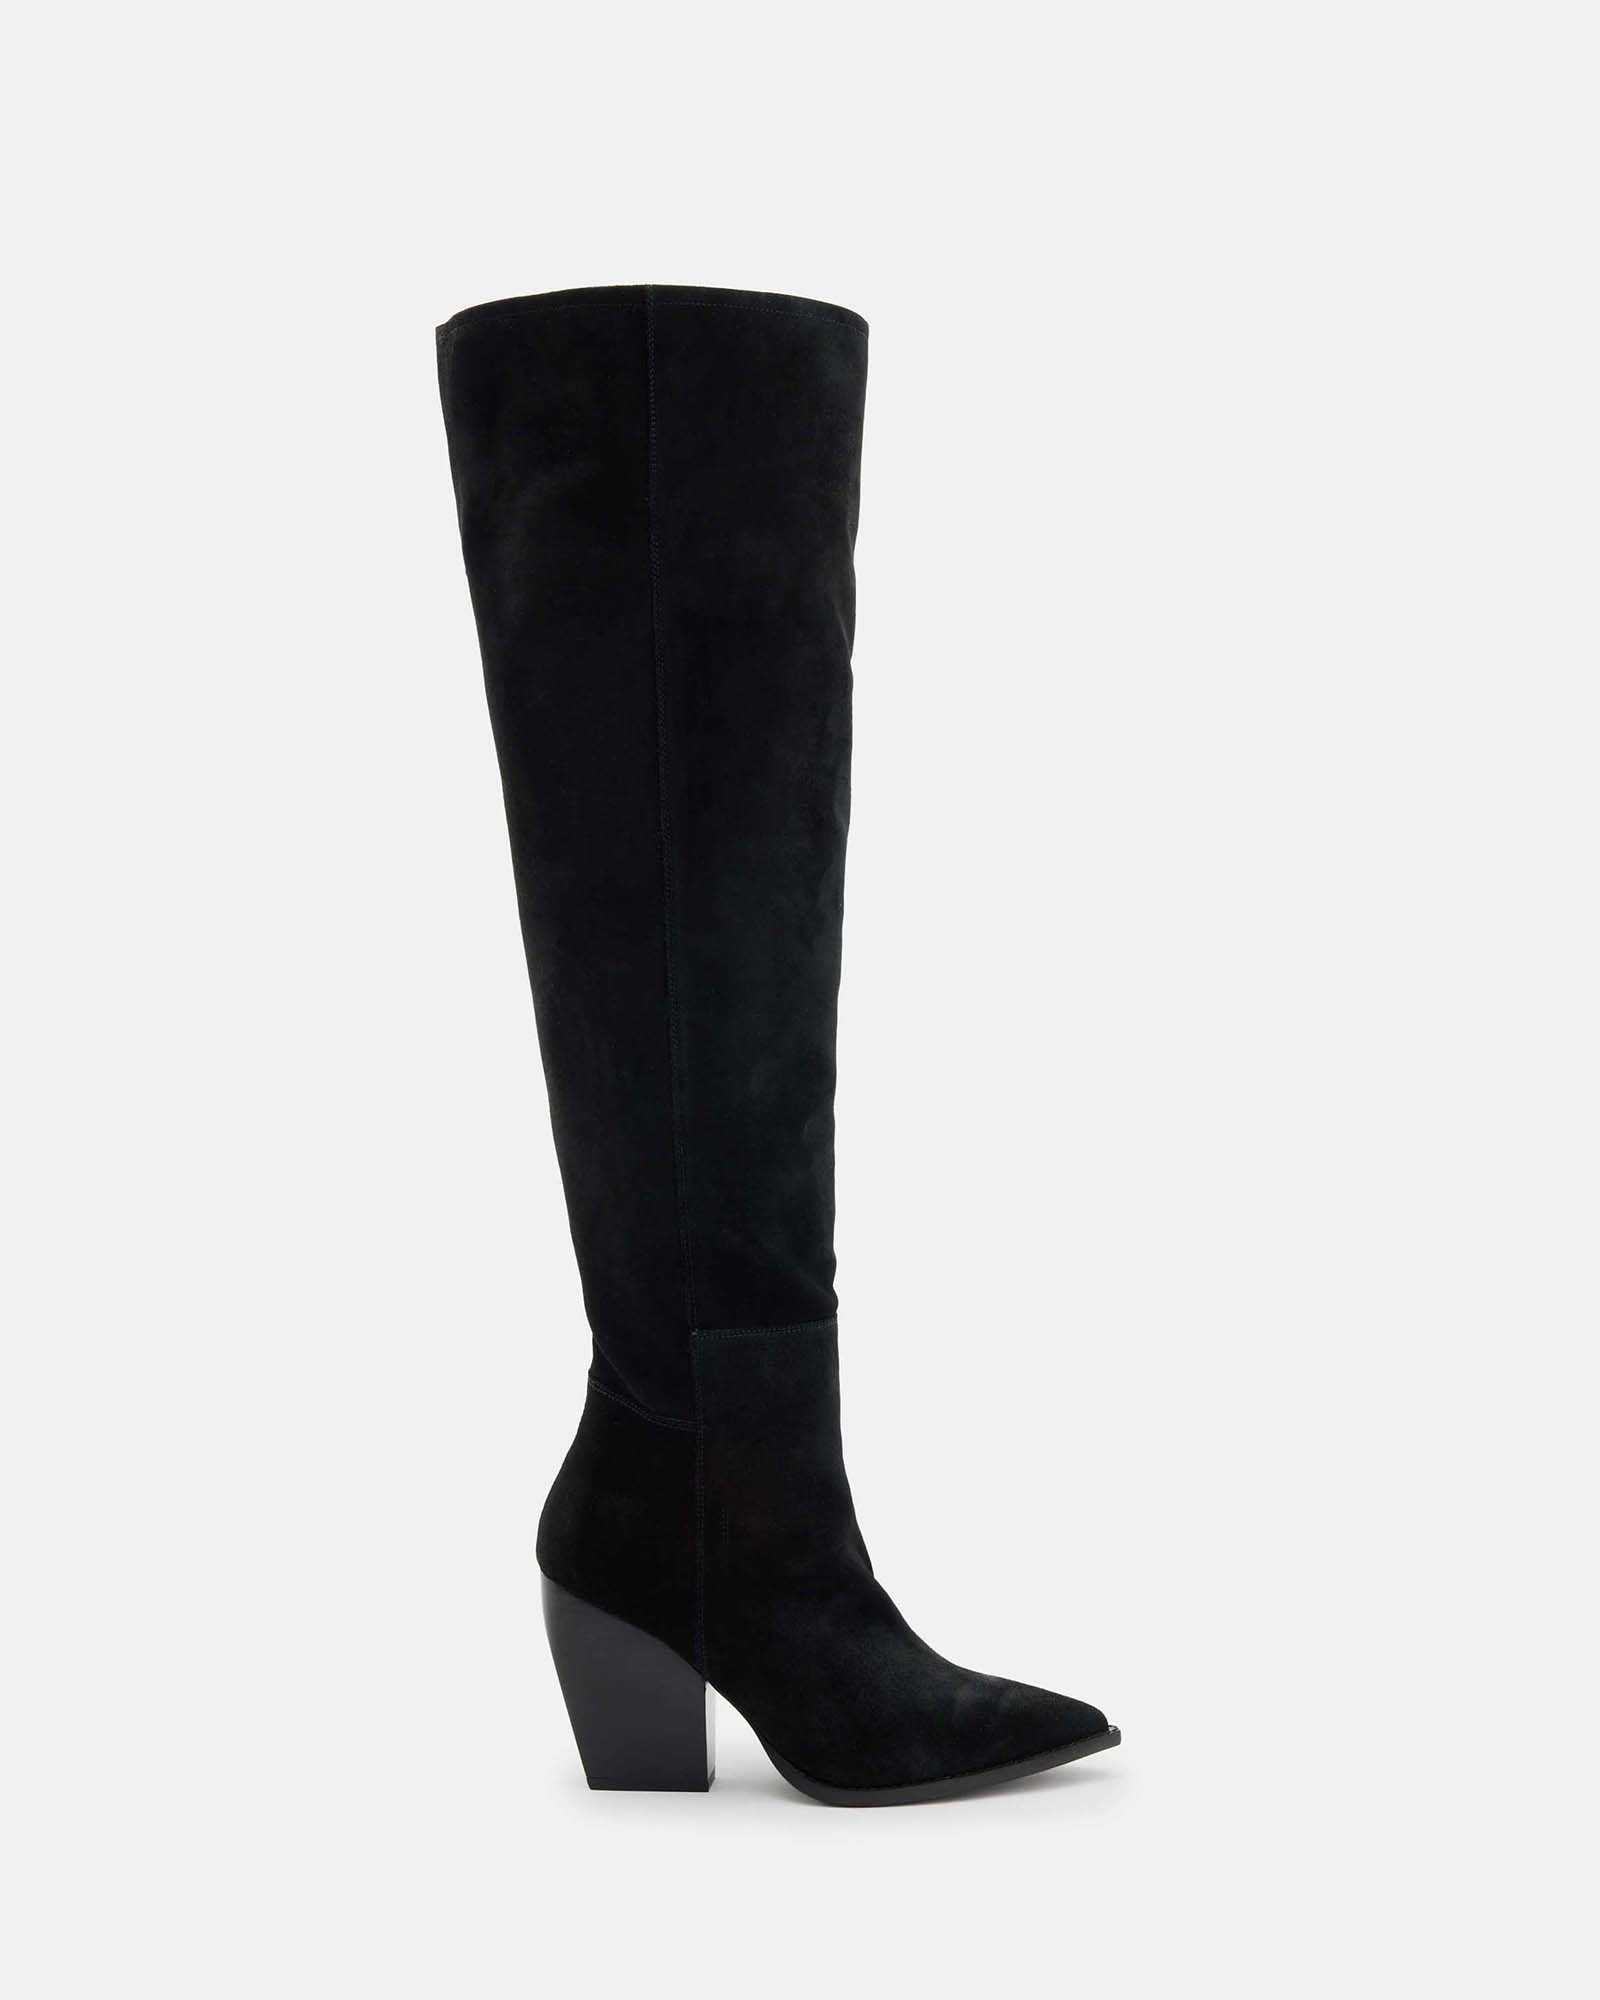 AllSaints Reina Knee High Pointed Suede Boots,, Black